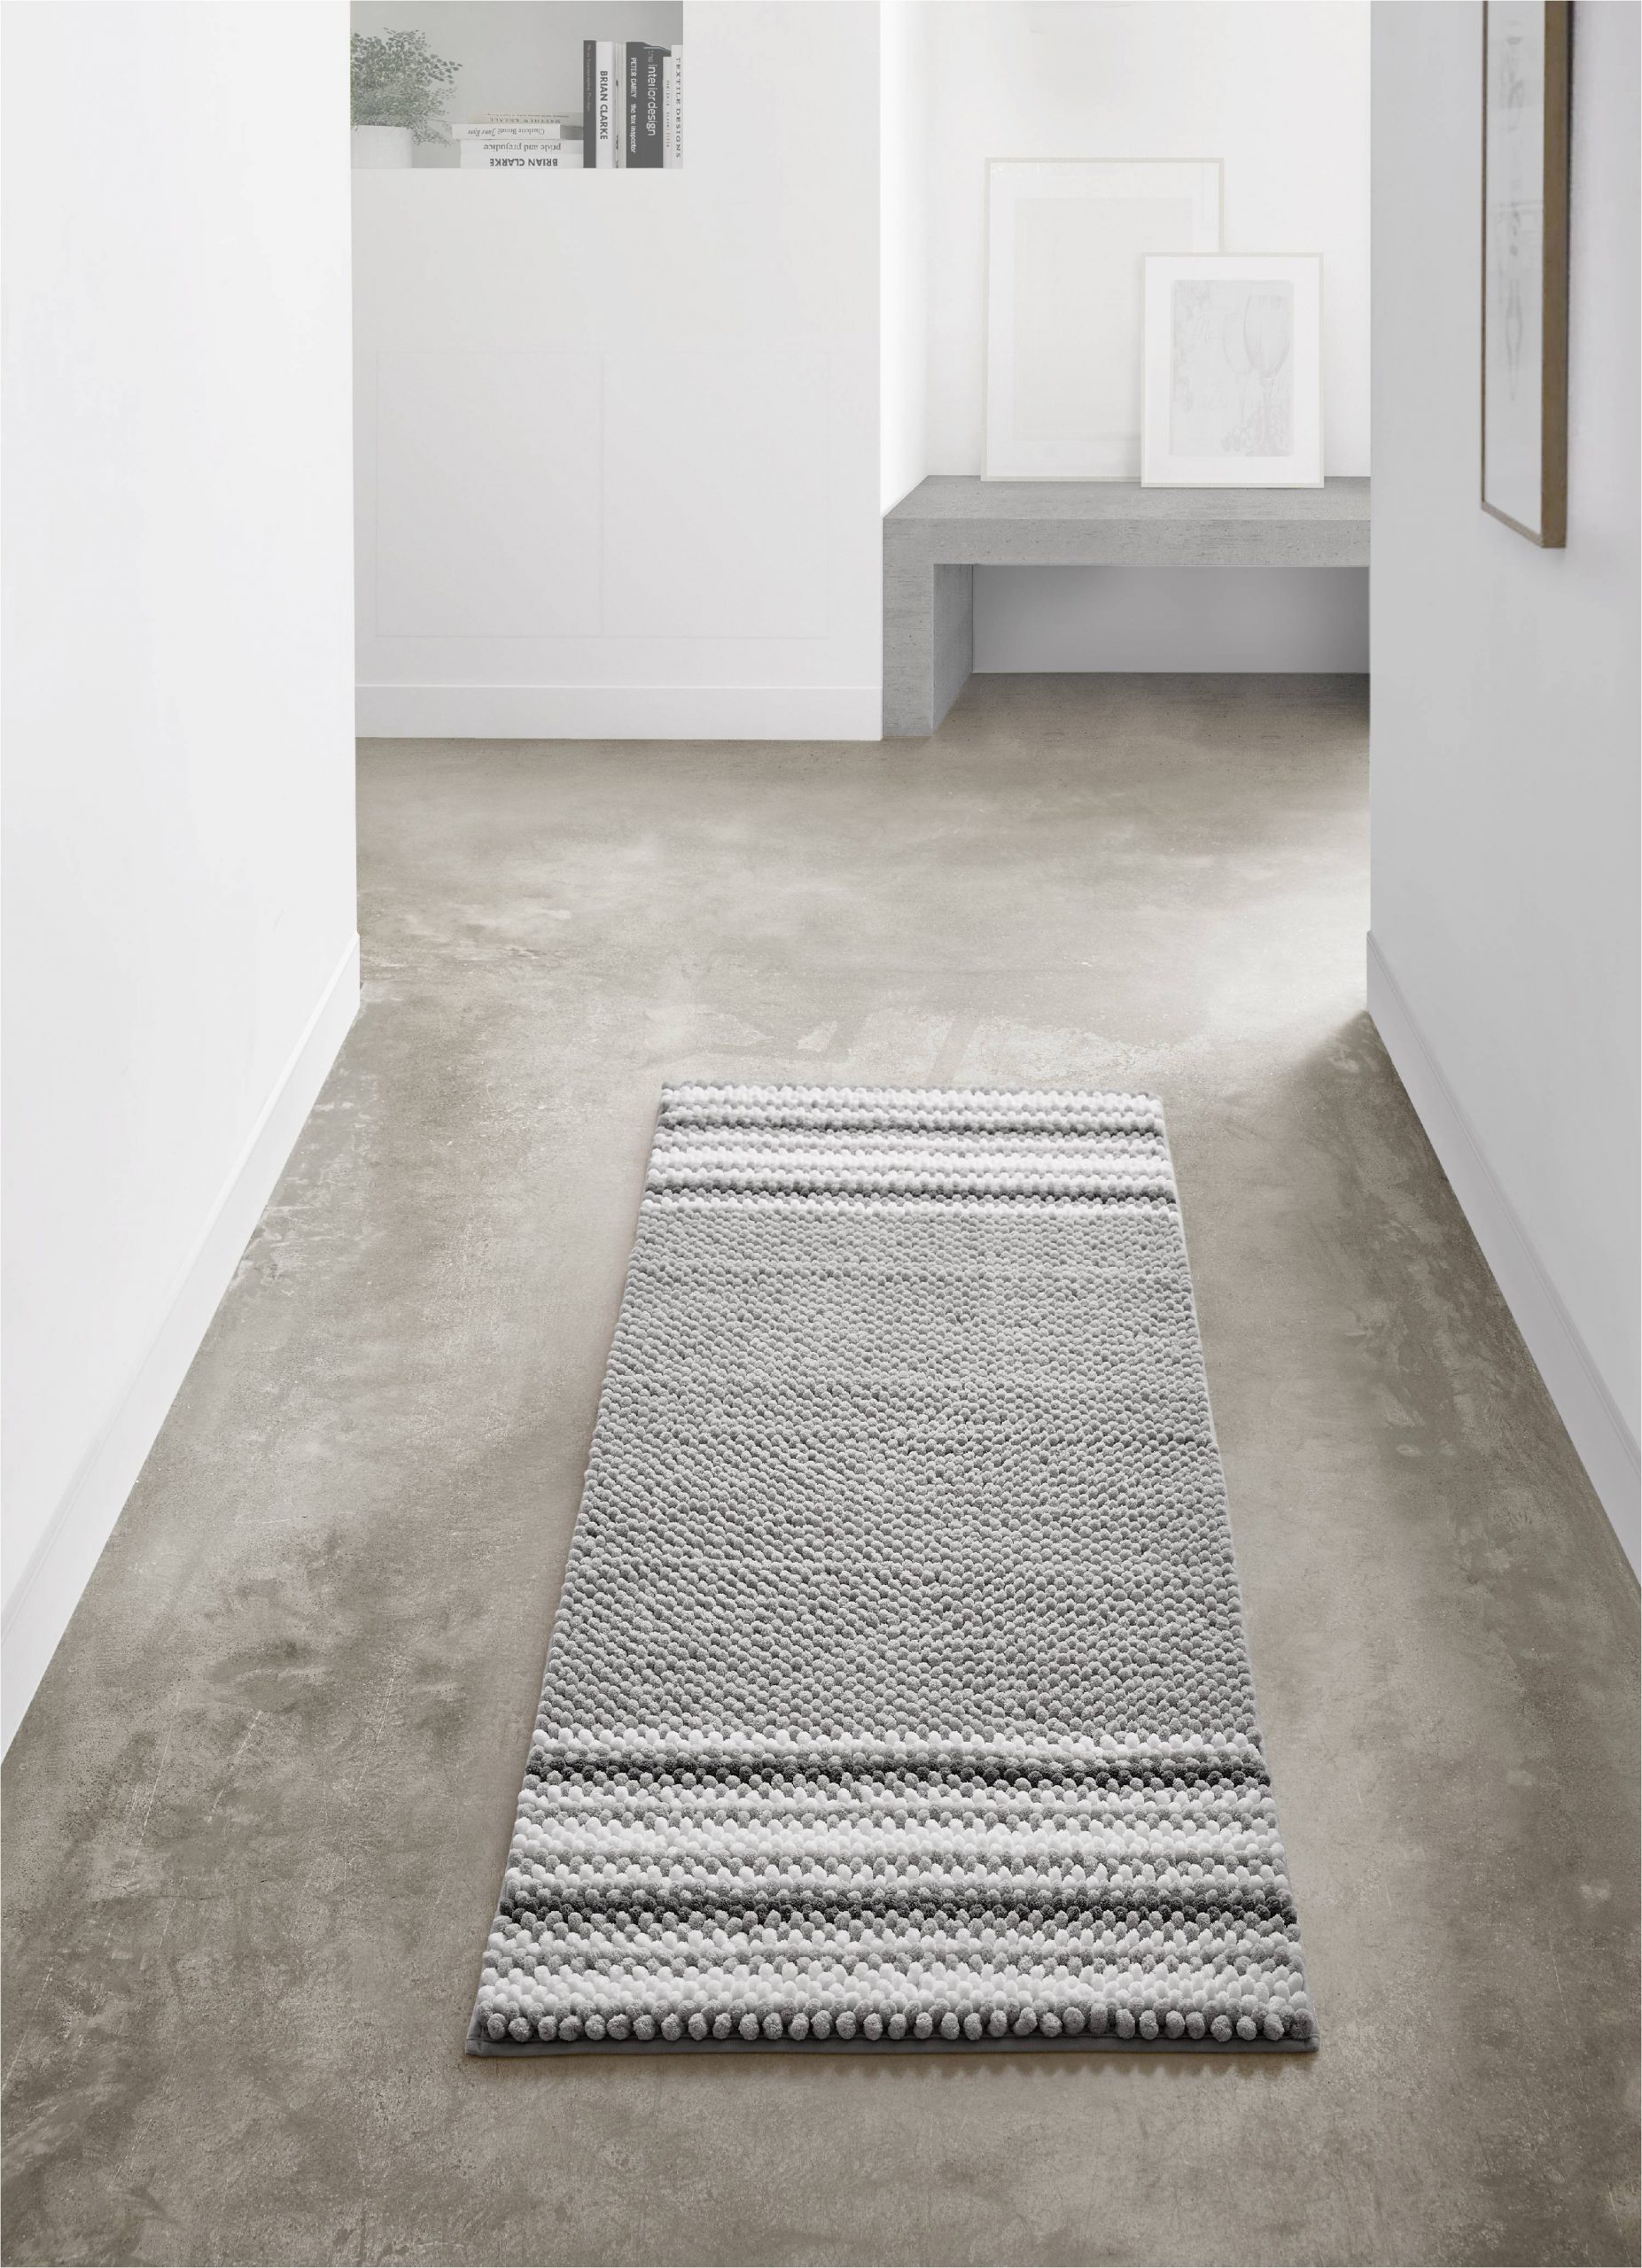 Grey Bathroom Rug Runner Vcny Home Aiden Jacquard Chenille Noodle Bath Runner 24 X 60 Taupe